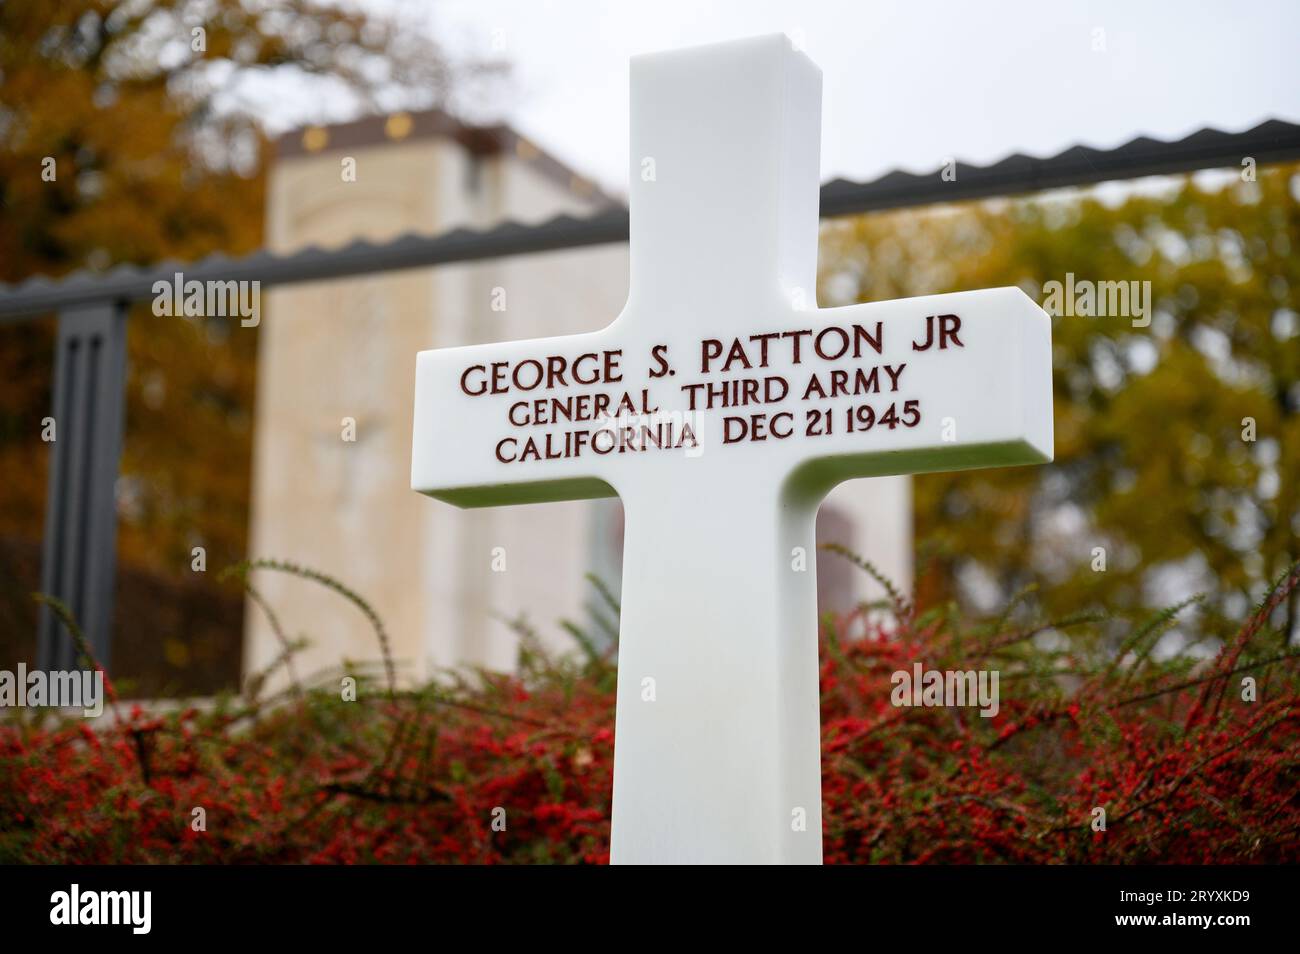 Grave of General George S. Patton Jr. Luxembourg American Cemetery and Memorial in Hamm, Luxembourg City, Luxembourg. Stock Photo